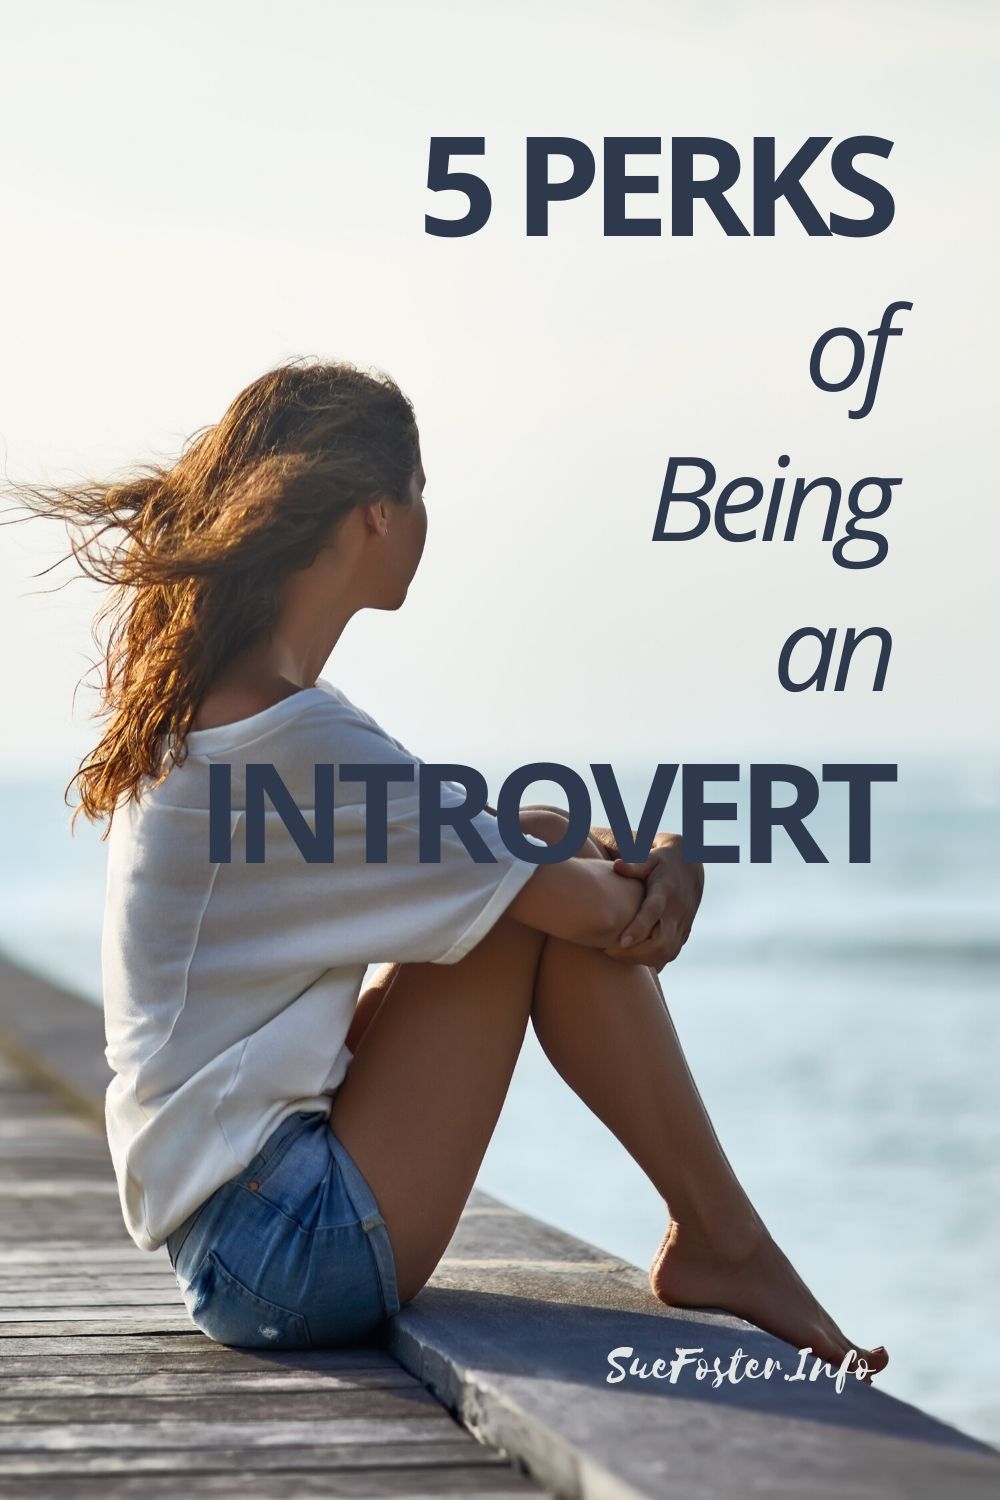 5-Perks-of-Being-an-Introvert-1